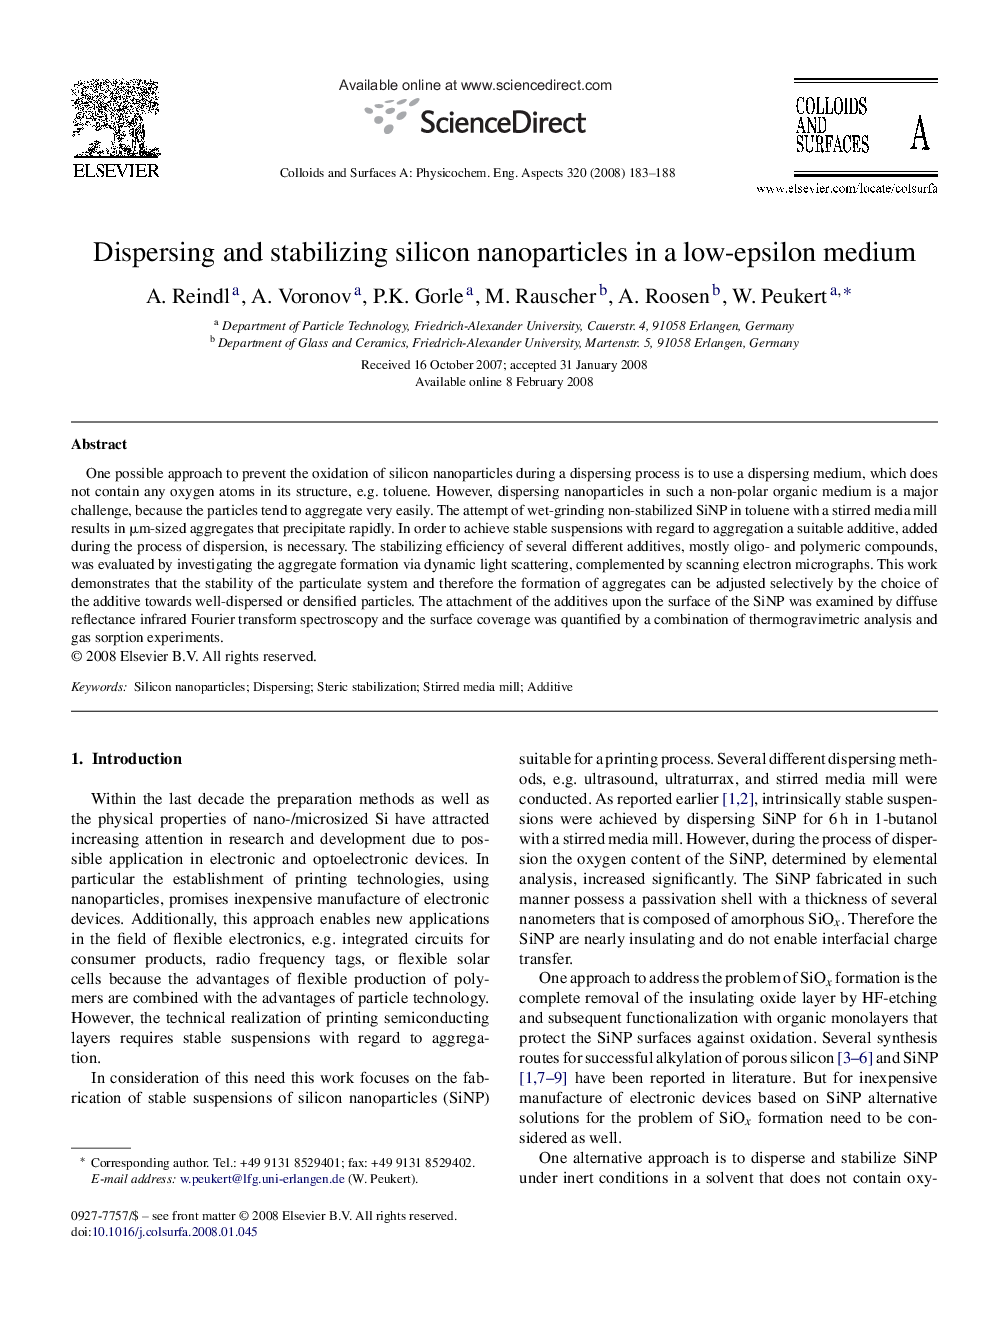 Dispersing and stabilizing silicon nanoparticles in a low-epsilon medium